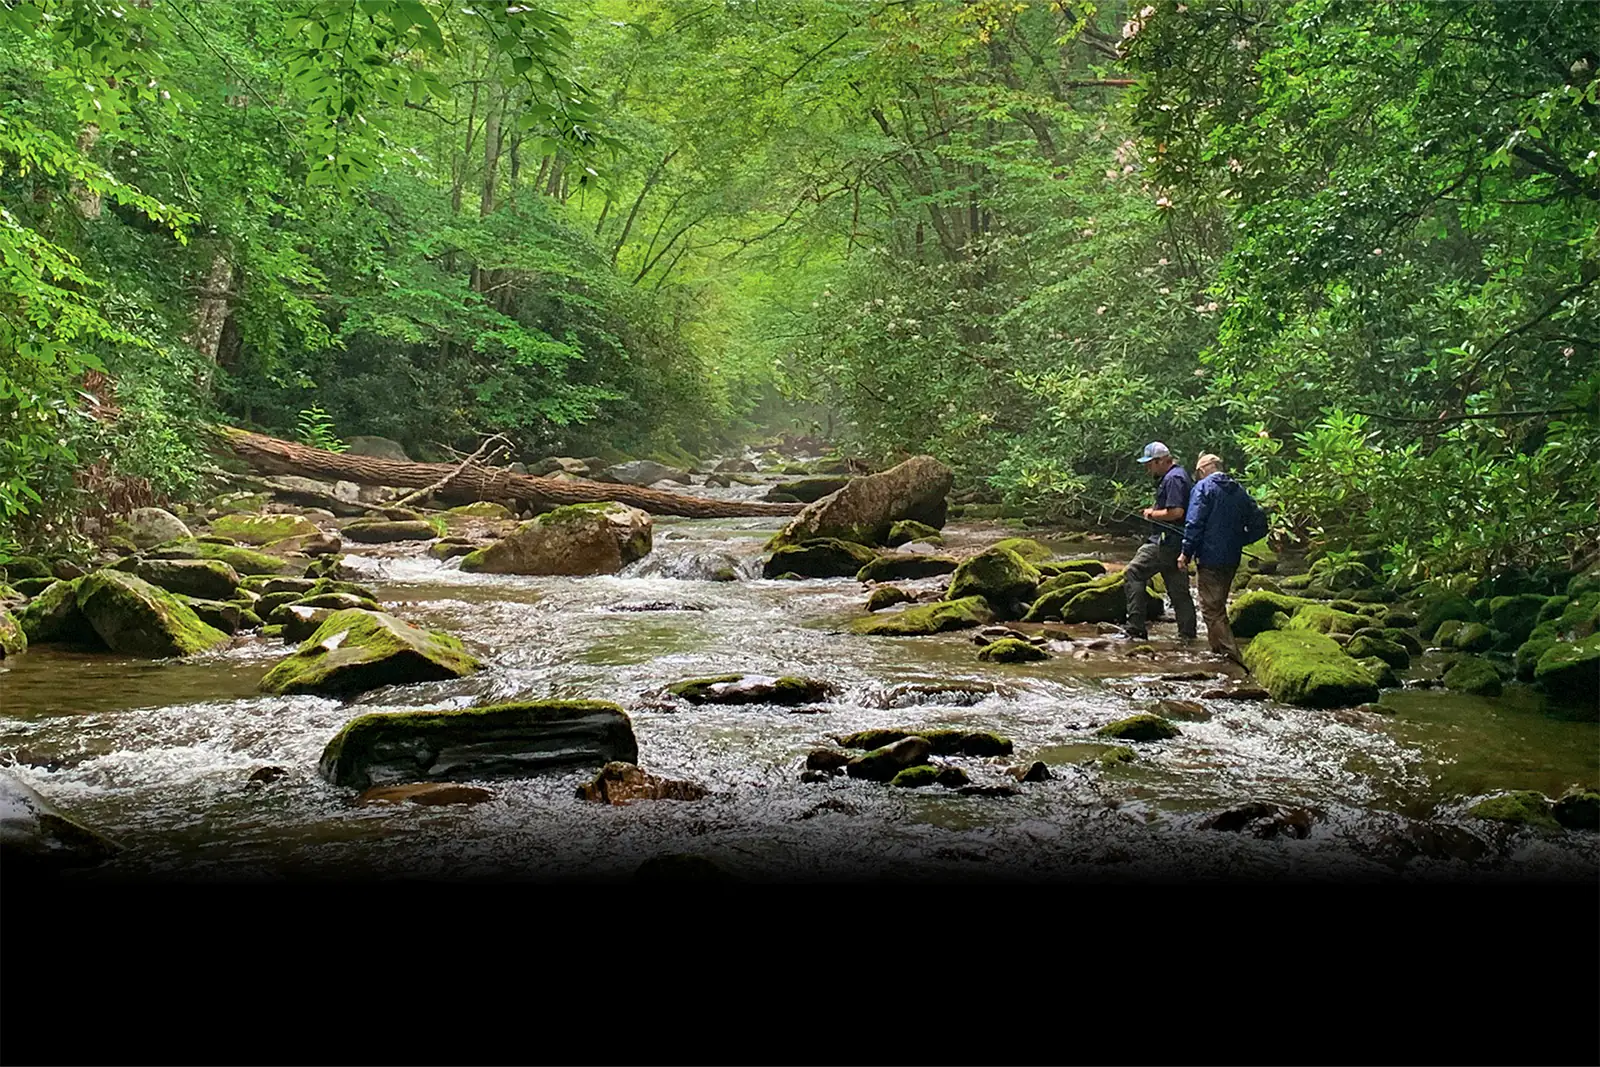 Two people wading through a shallow river carrying fly fishing rods surrounded by green foliage.